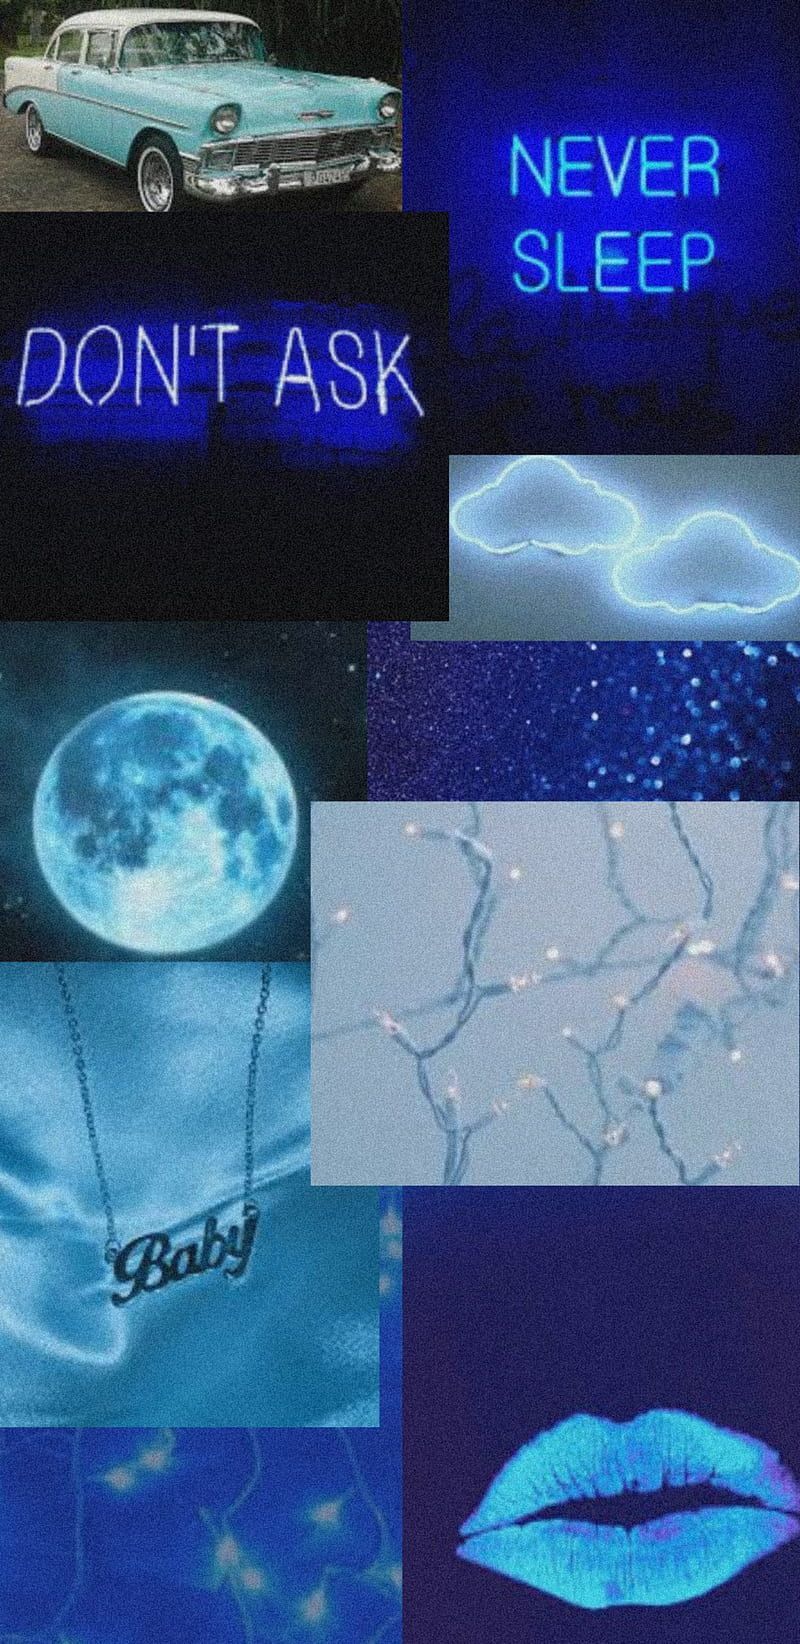 A collage of pictures with different colors and text - Blue, neon blue, pastel blue, lips, bright